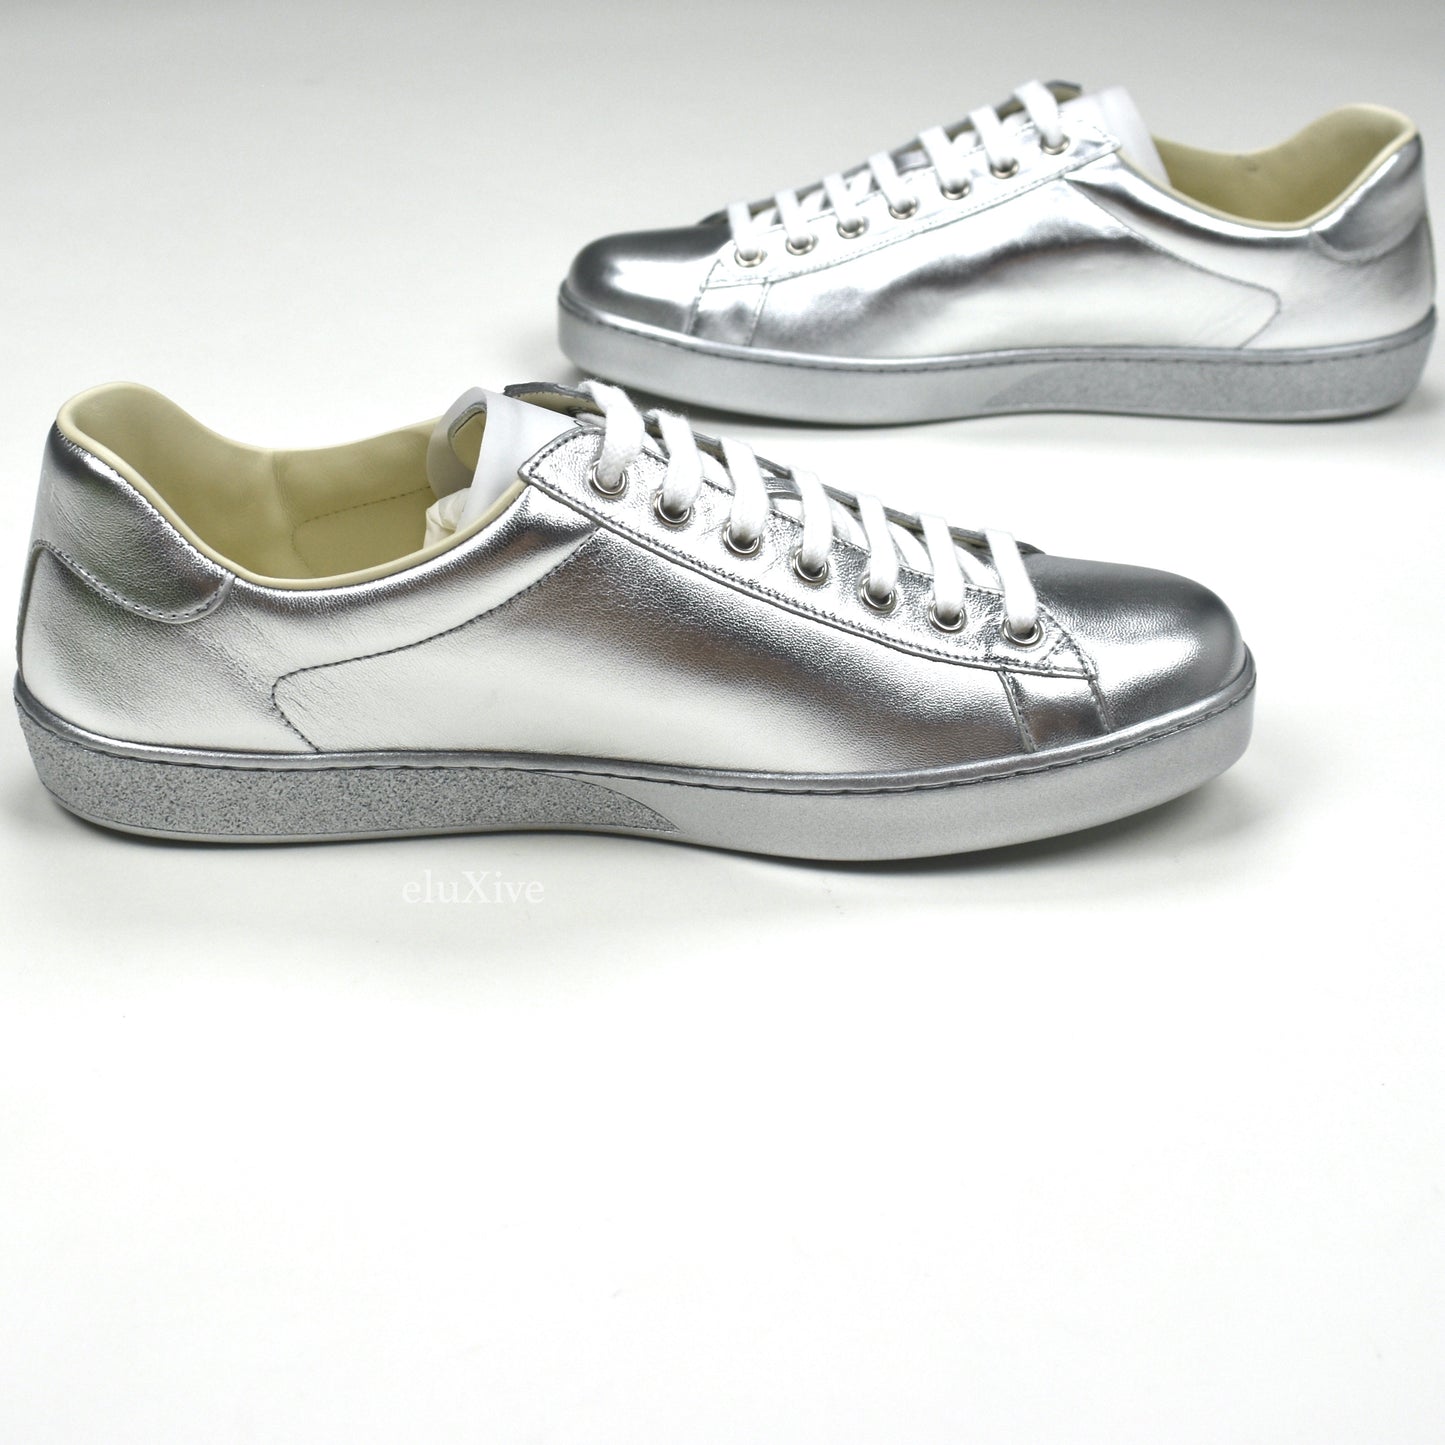 Gucci - Metallic Silver Leather Ace Sneakers